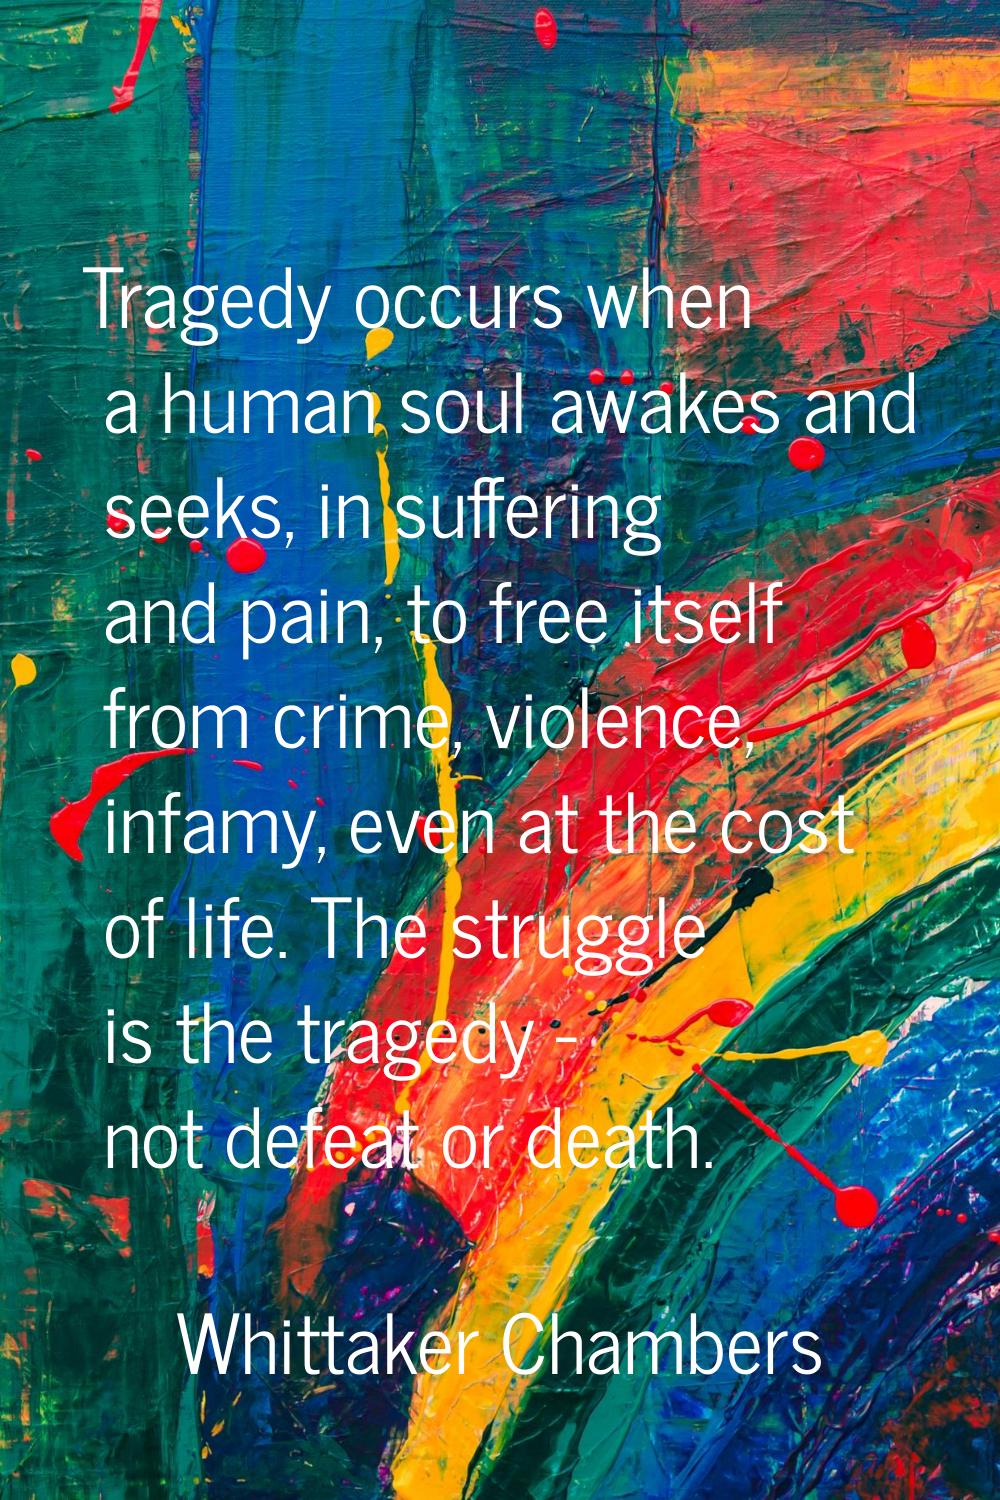 Tragedy occurs when a human soul awakes and seeks, in suffering and pain, to free itself from crime